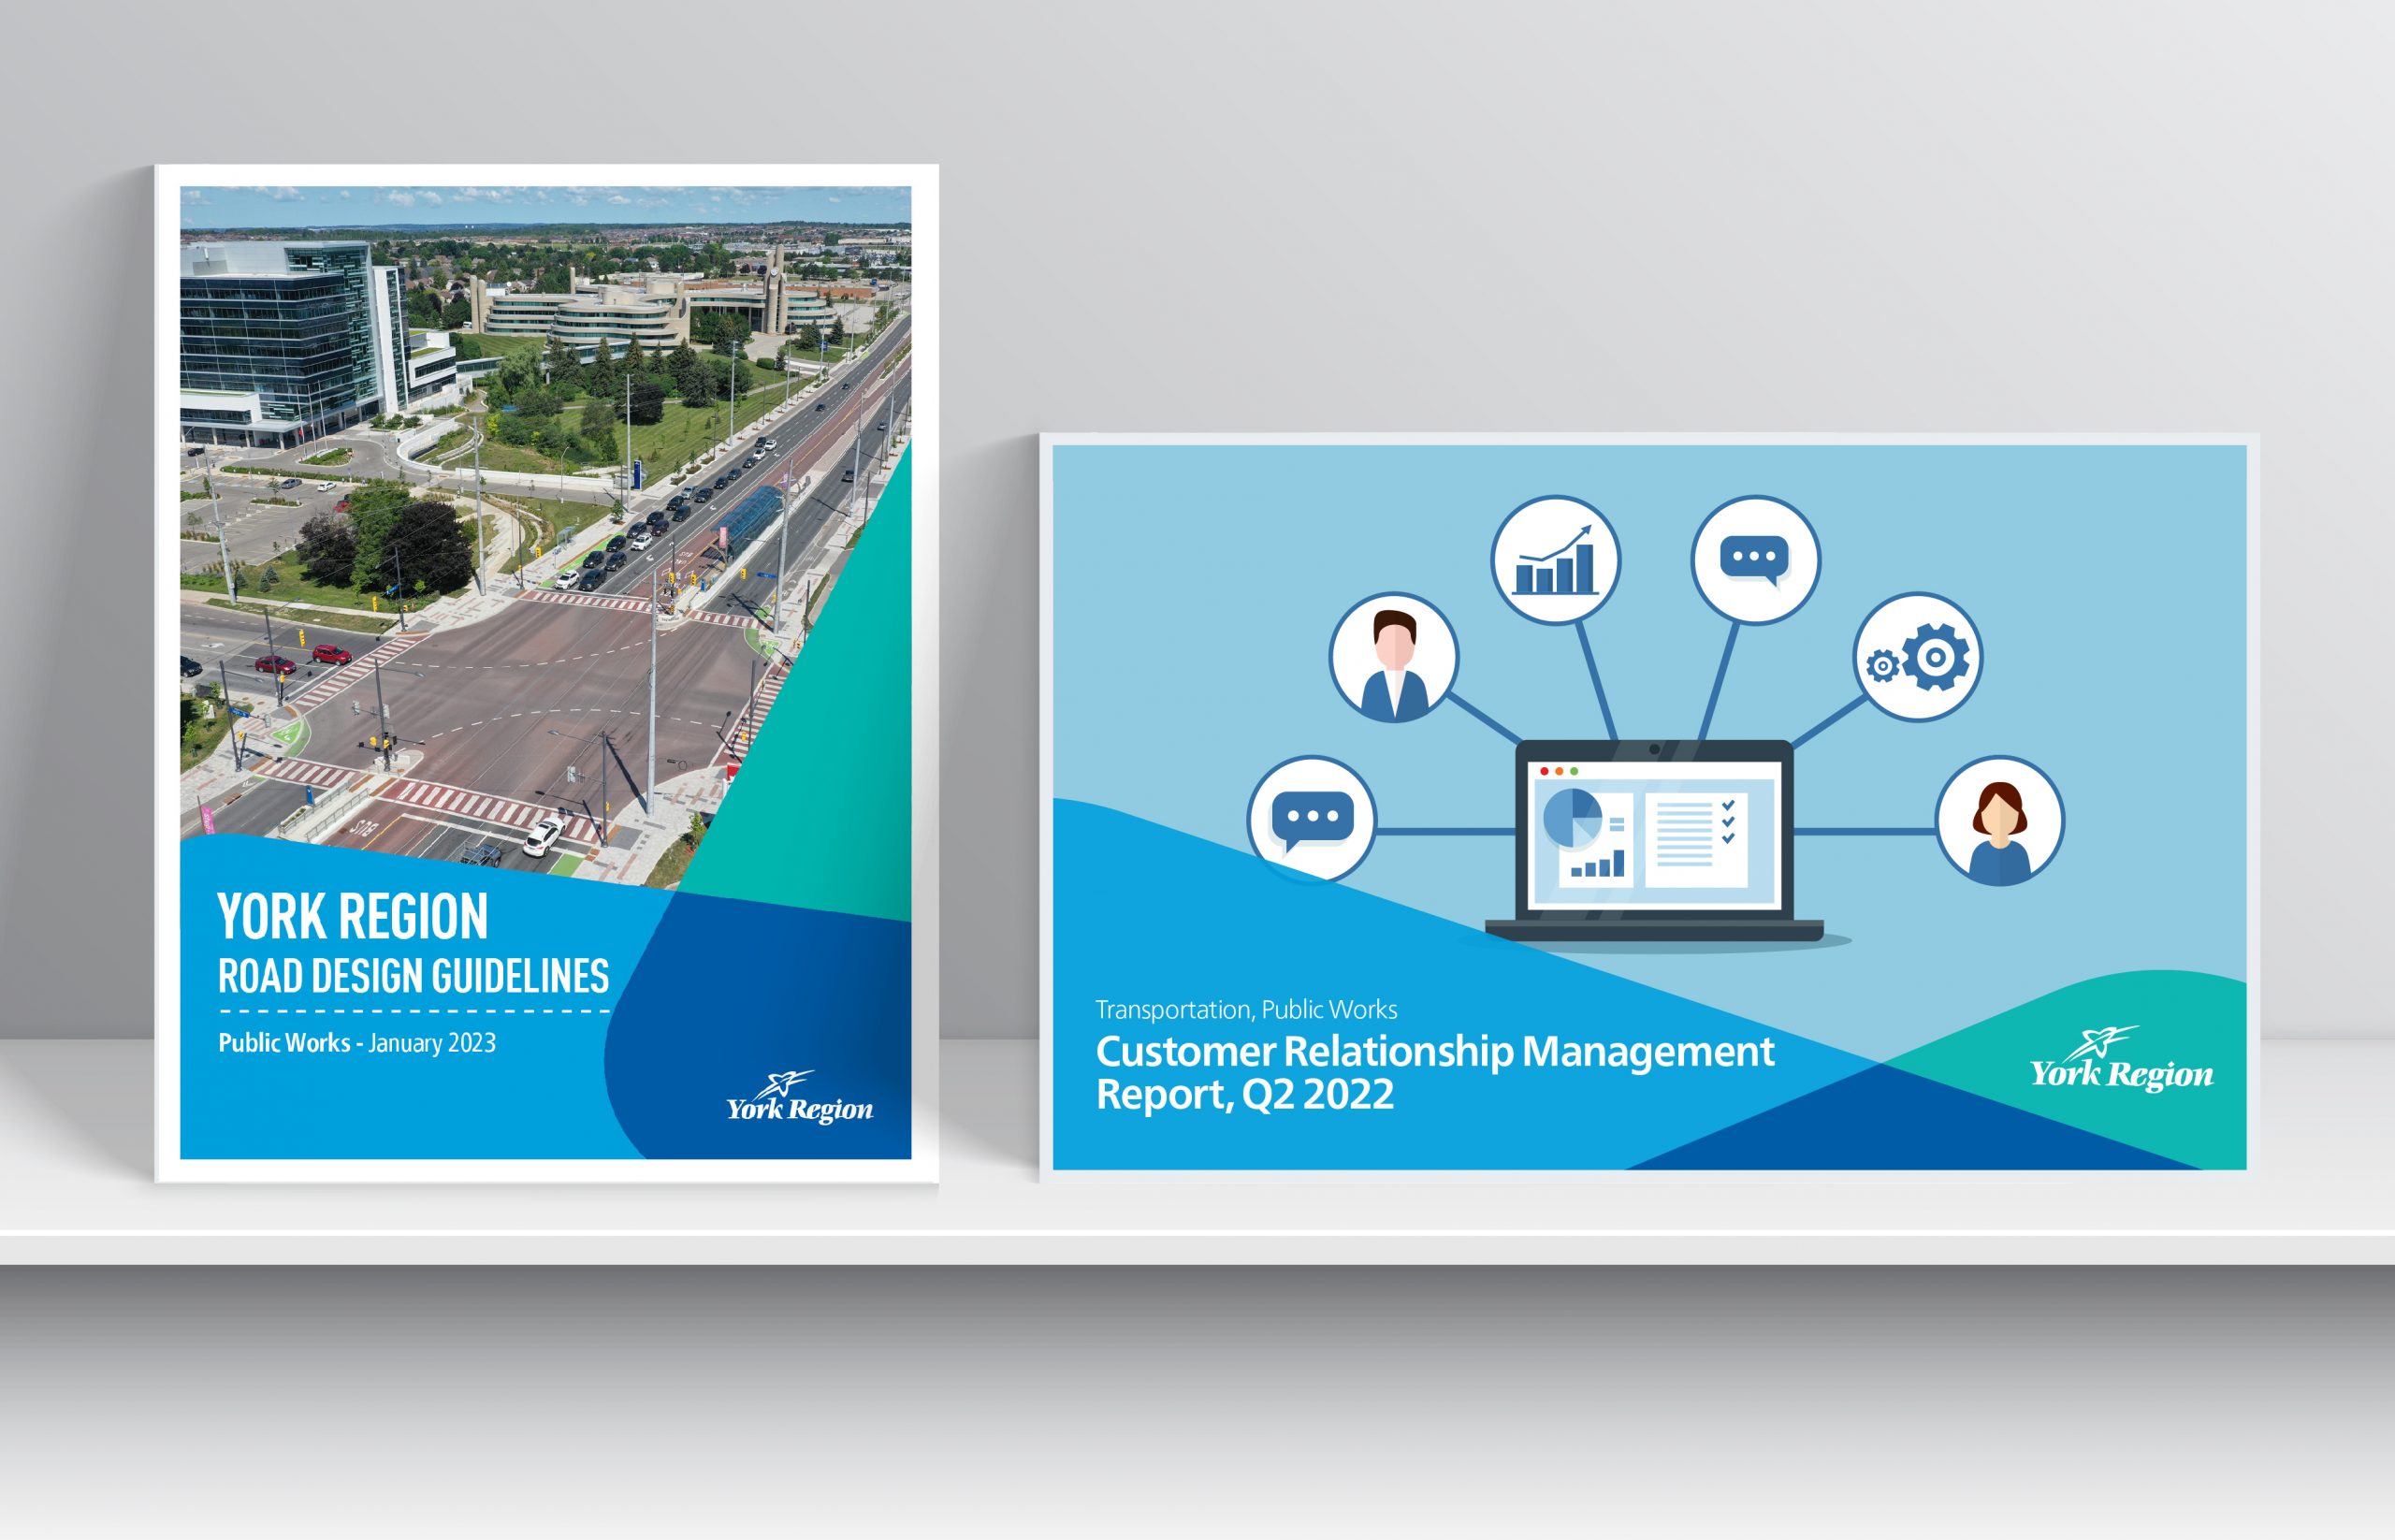 The cover of Road Design Guideline and Customer Relationship Management Report